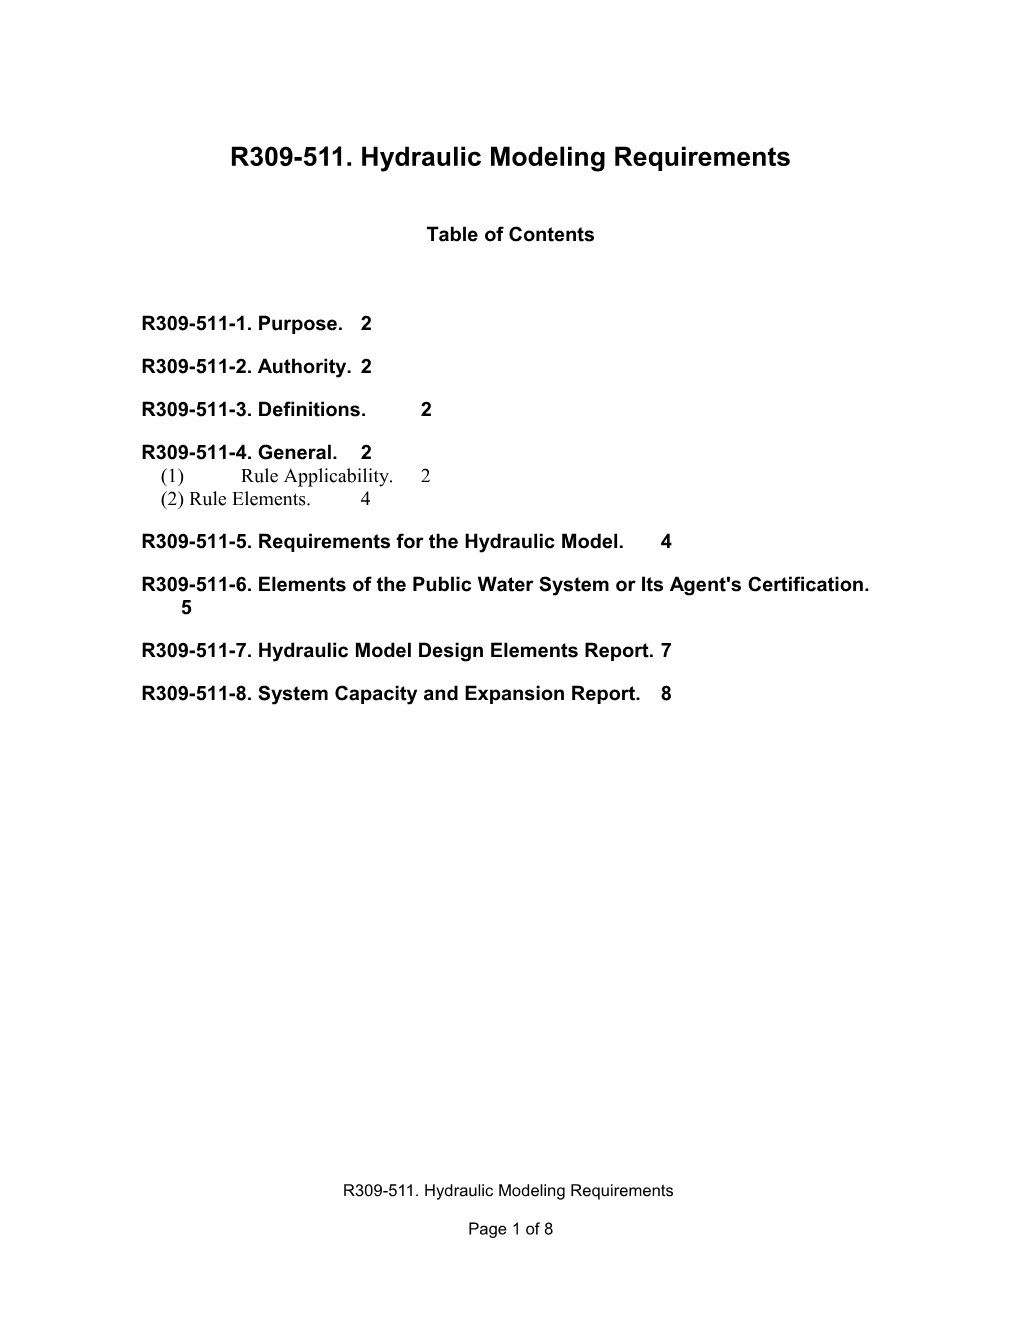 R309-511. Hydraulic Modeling Requirements